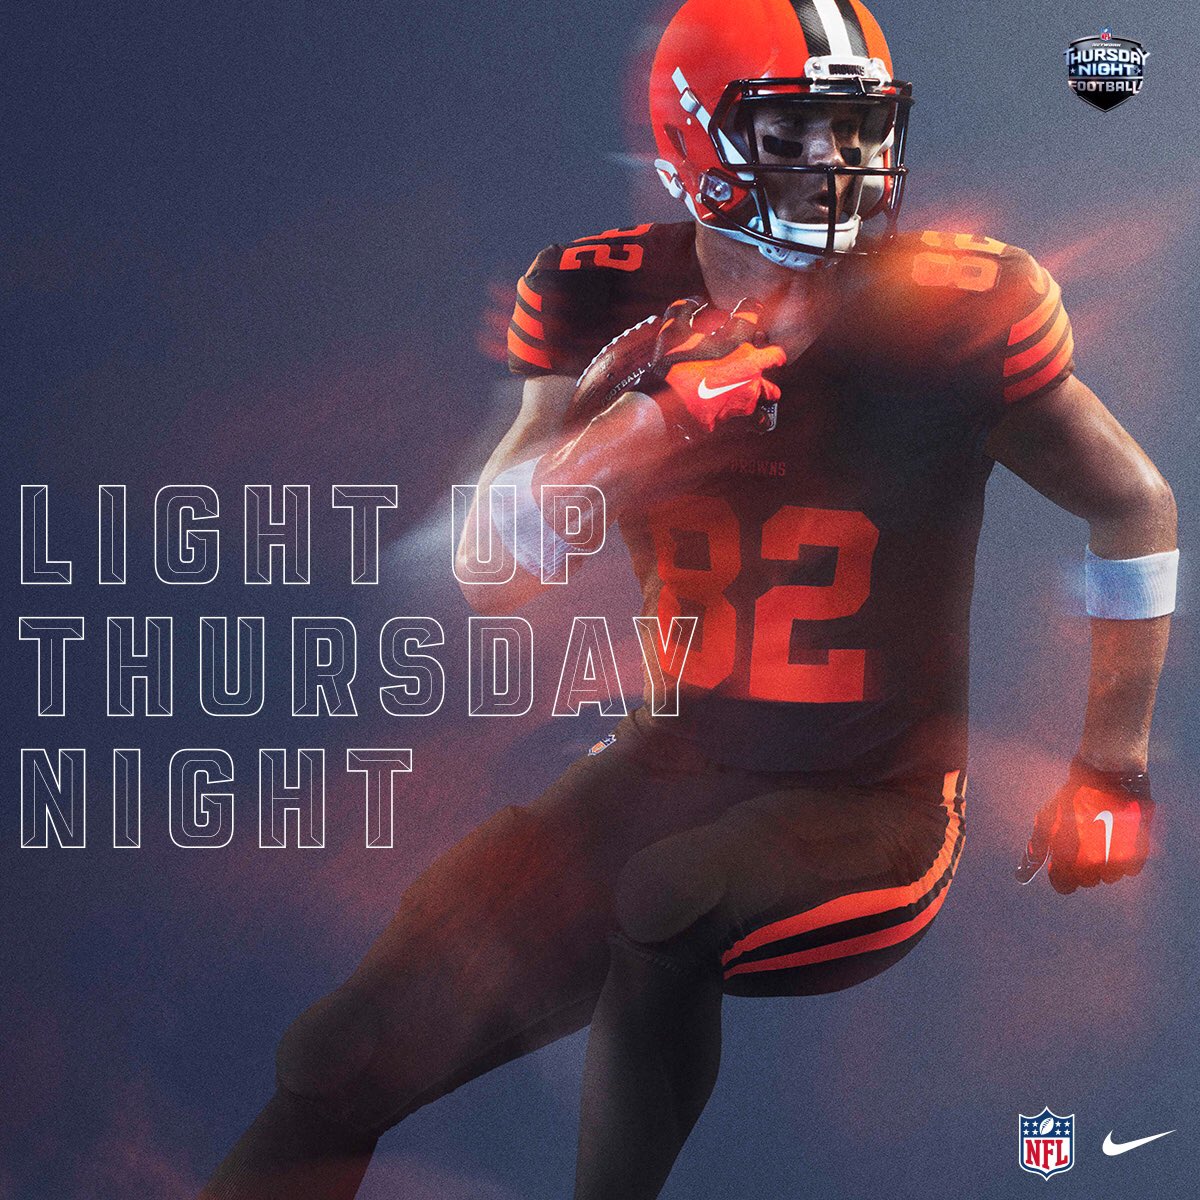 every color rush jersey